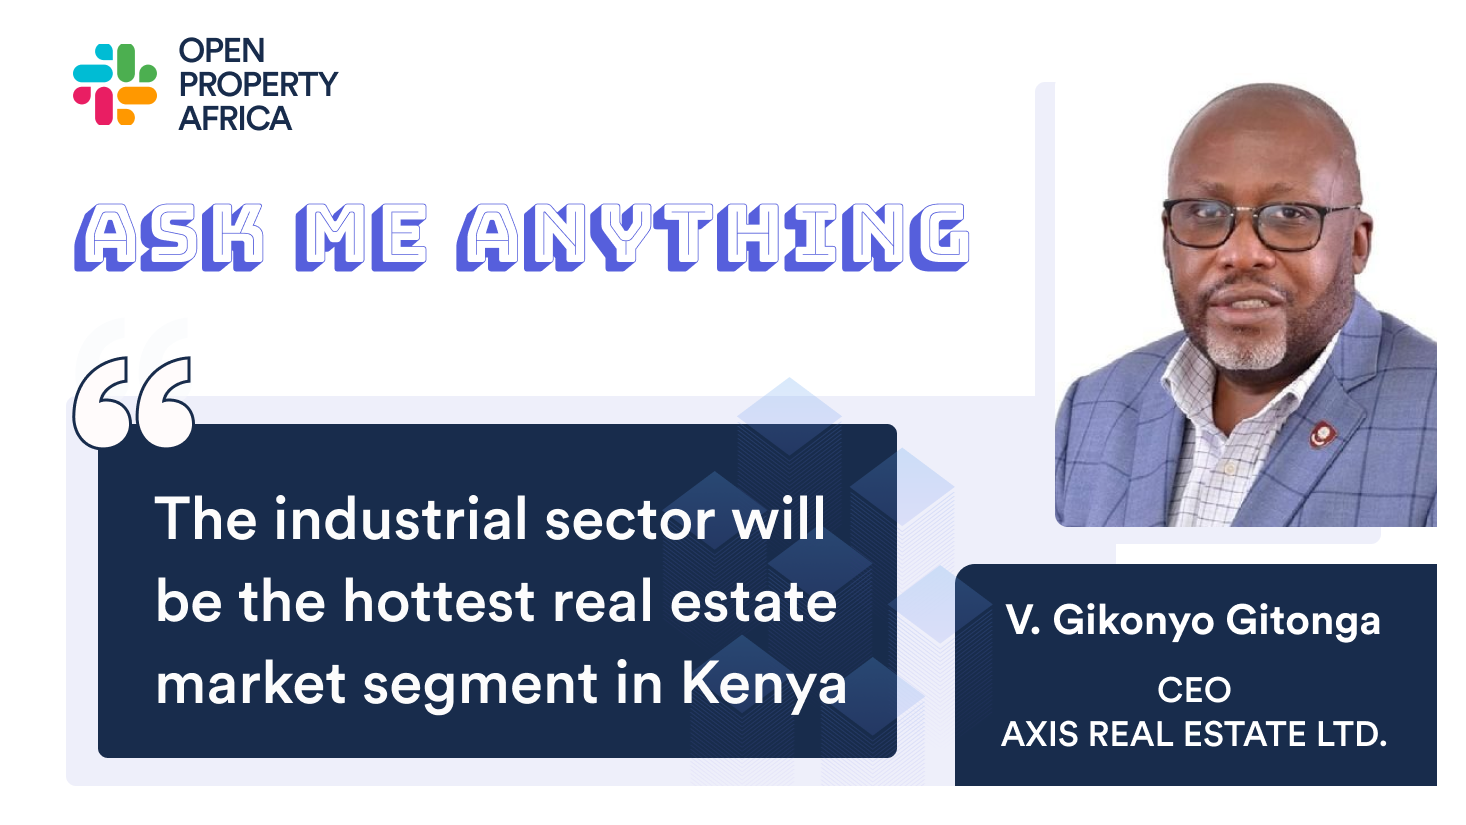 The industrial sector will be the hottest real estate market segment in Kenya